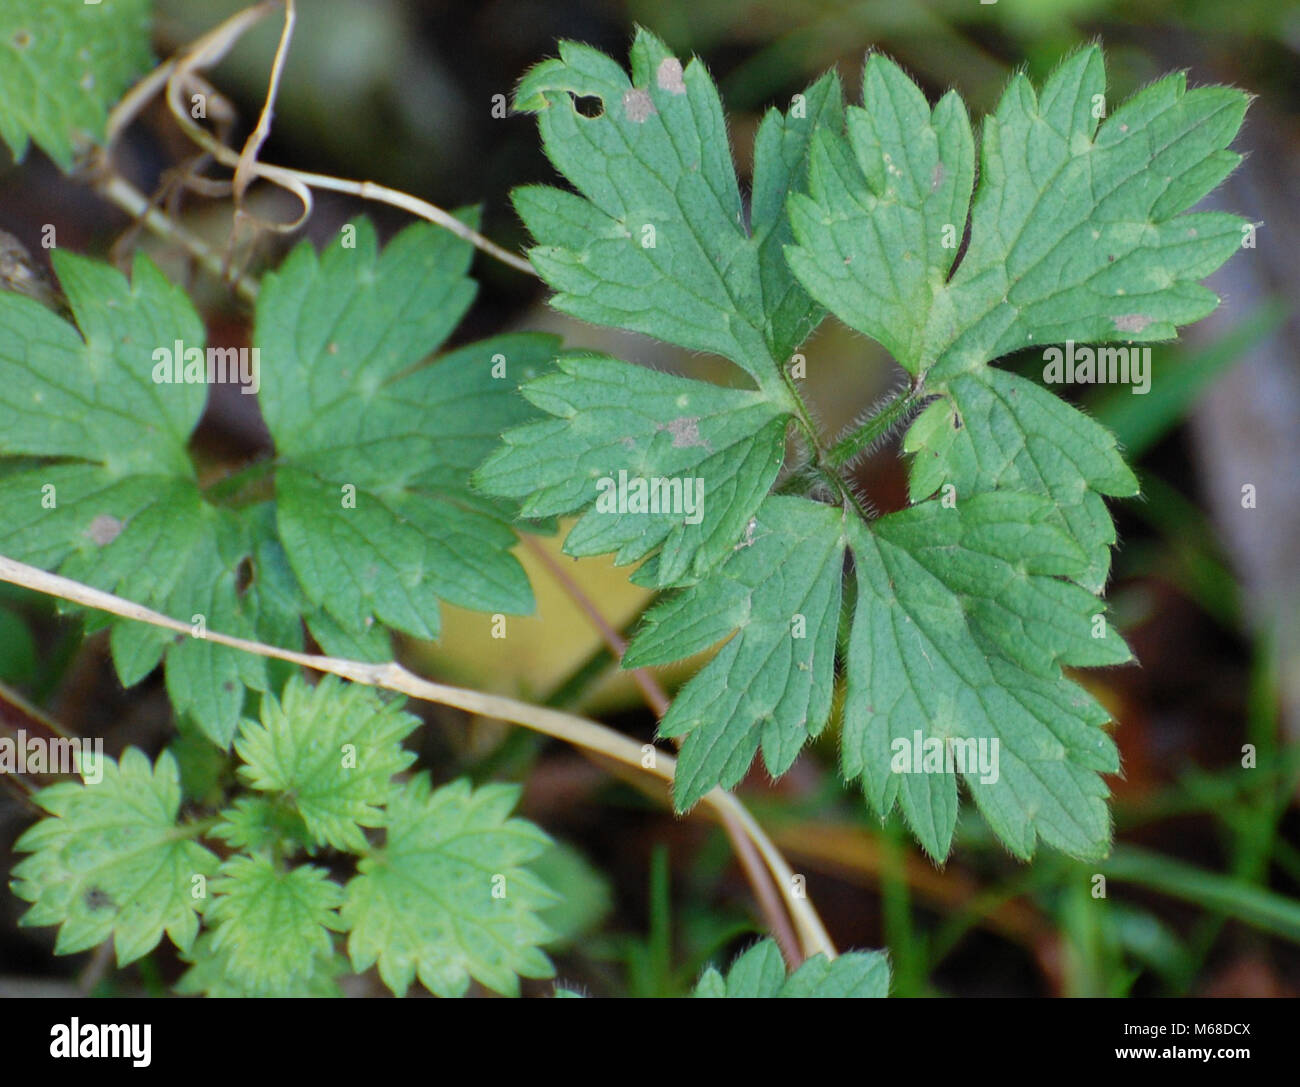 Creeping buttercup leaves, close up view, uk Stock Photo